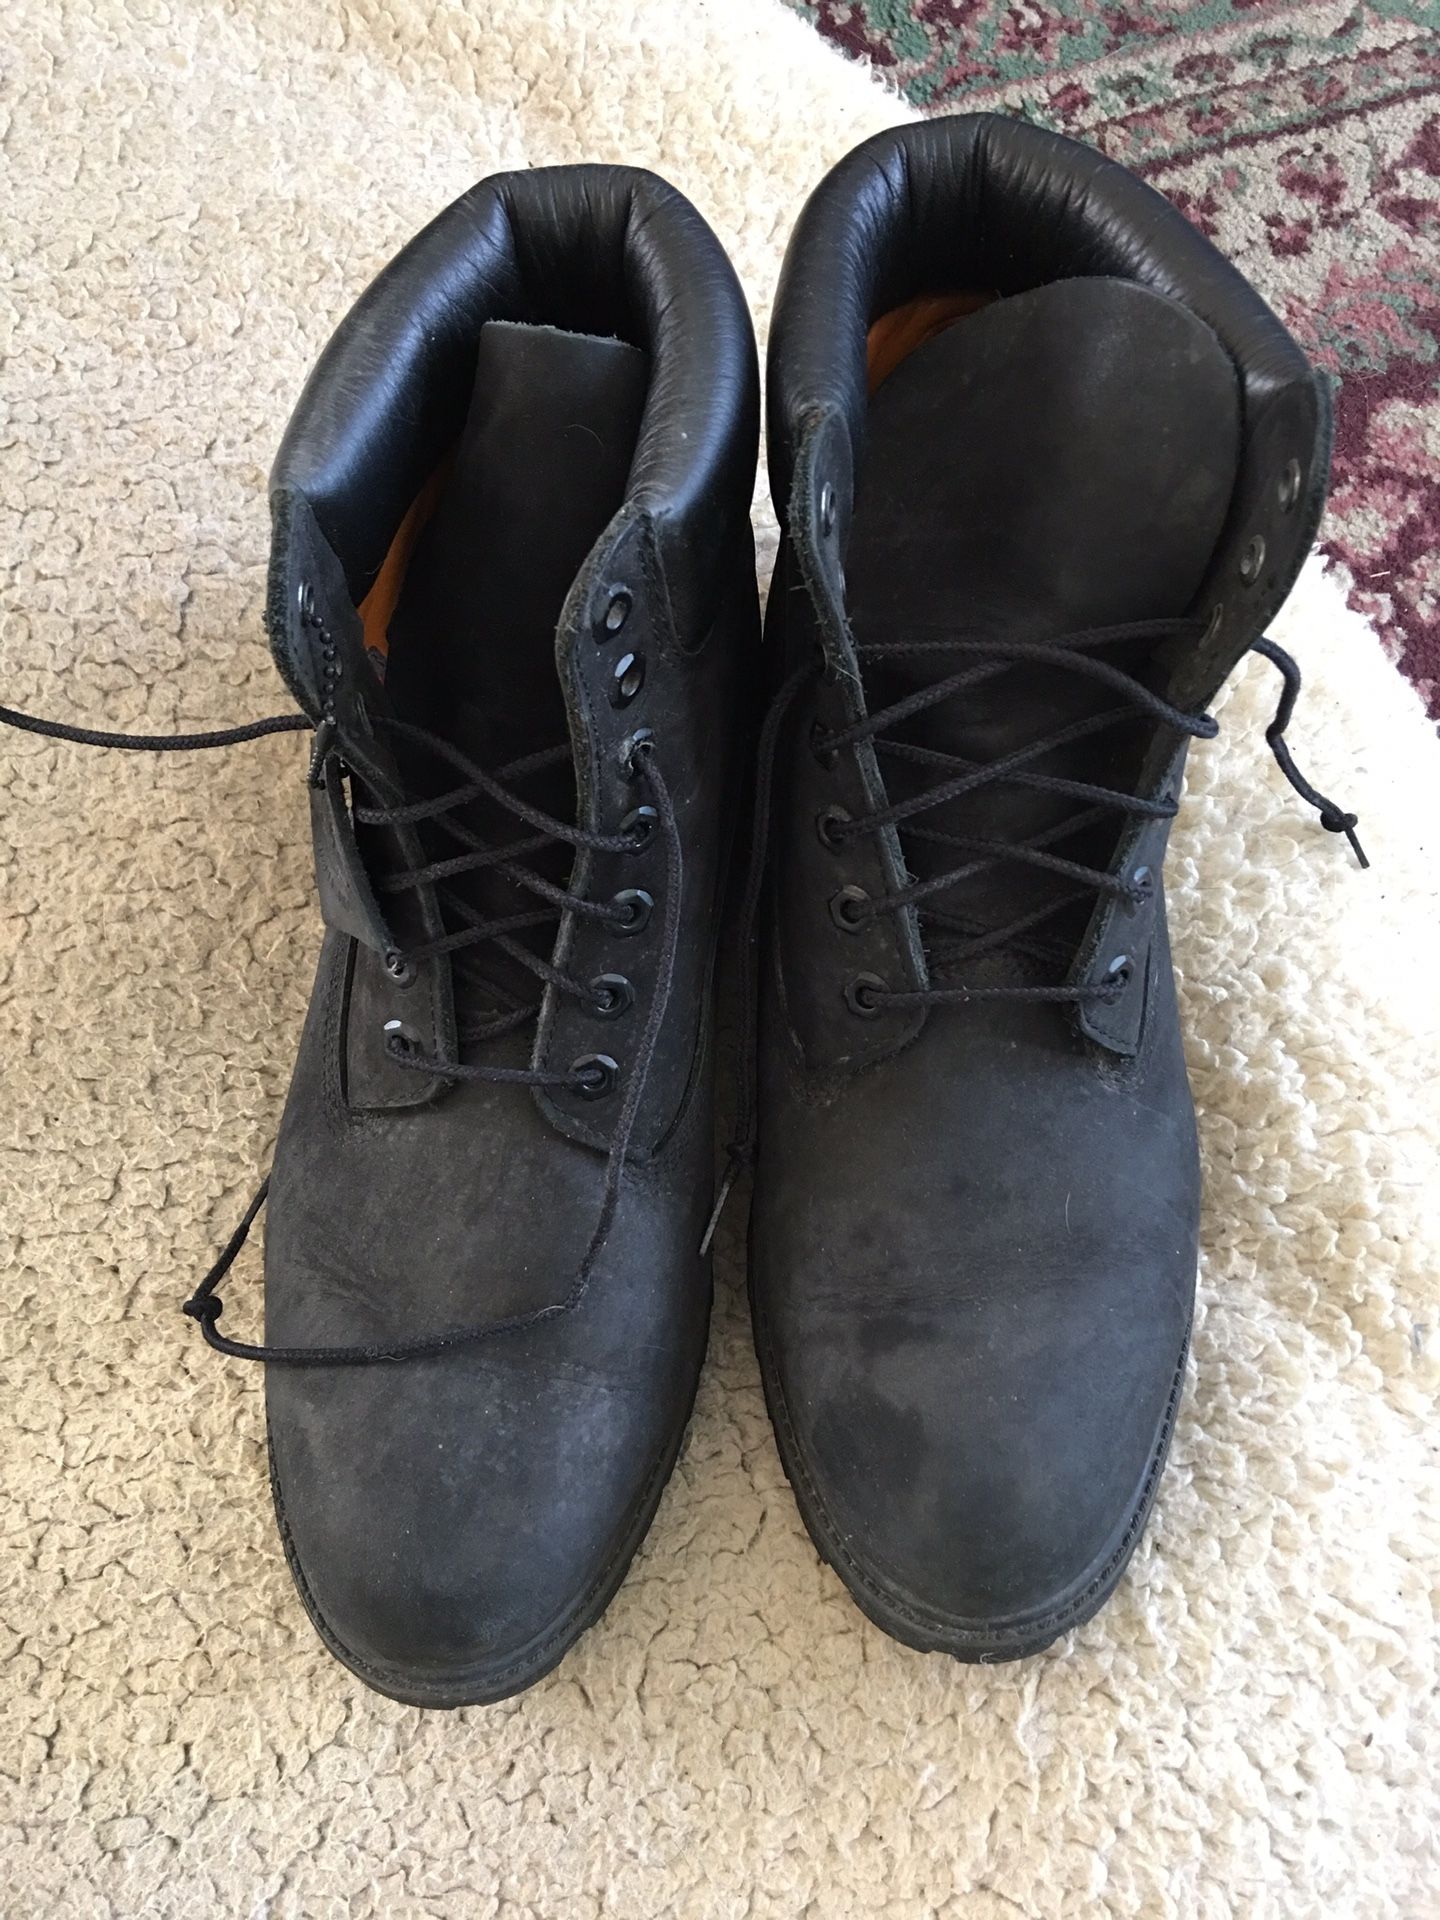 TIMBERLAND BLACK LEATHER BOOTS SIZE 11